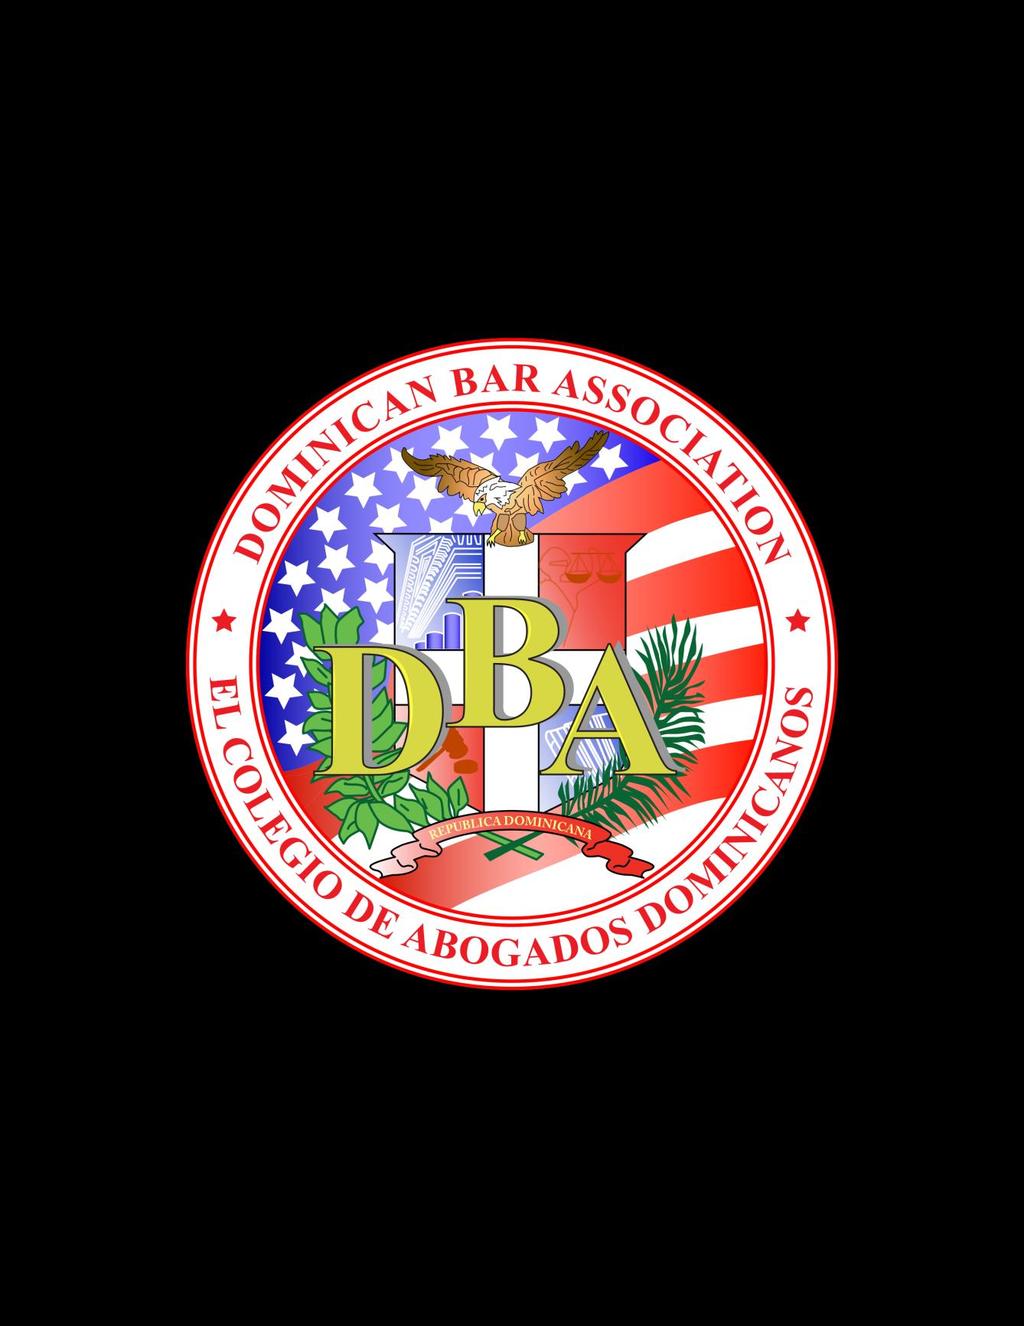 THE DOMINICAN BAR ASSOCIATION 14th